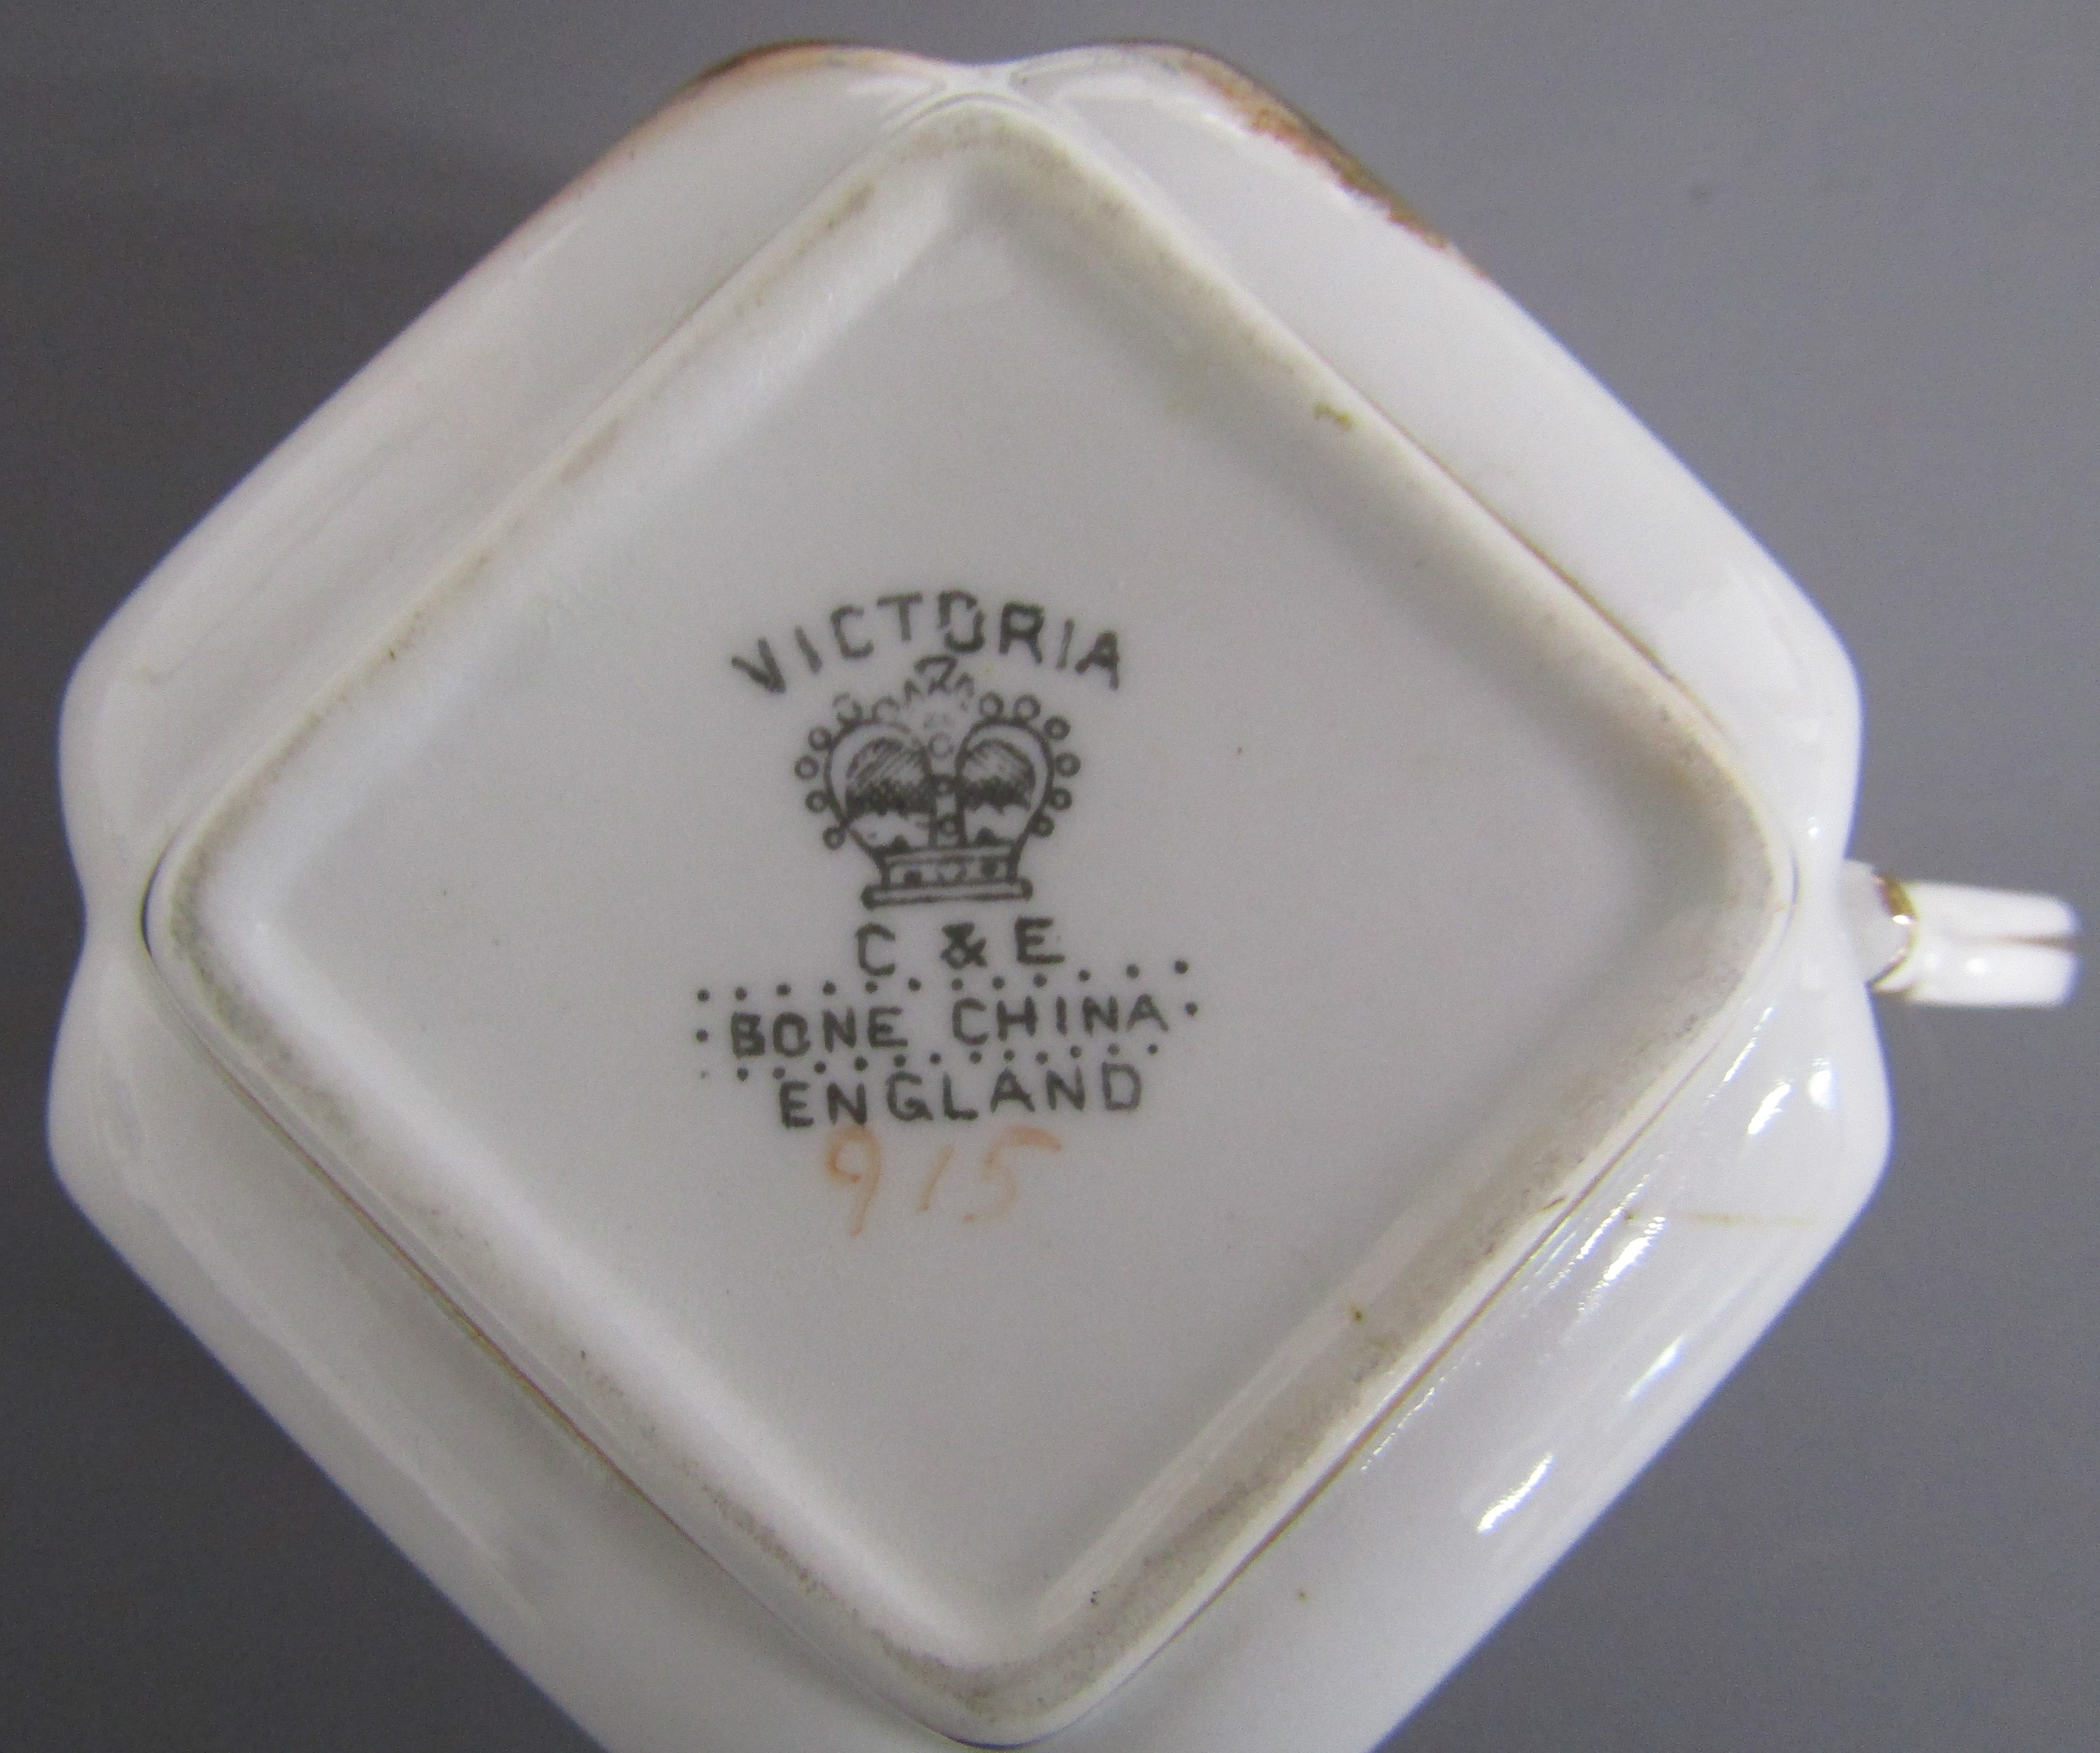 Victoria C & E bone China teacups, saucers, cake plates, side plates (one repaired), sugar bowl - Image 5 of 5